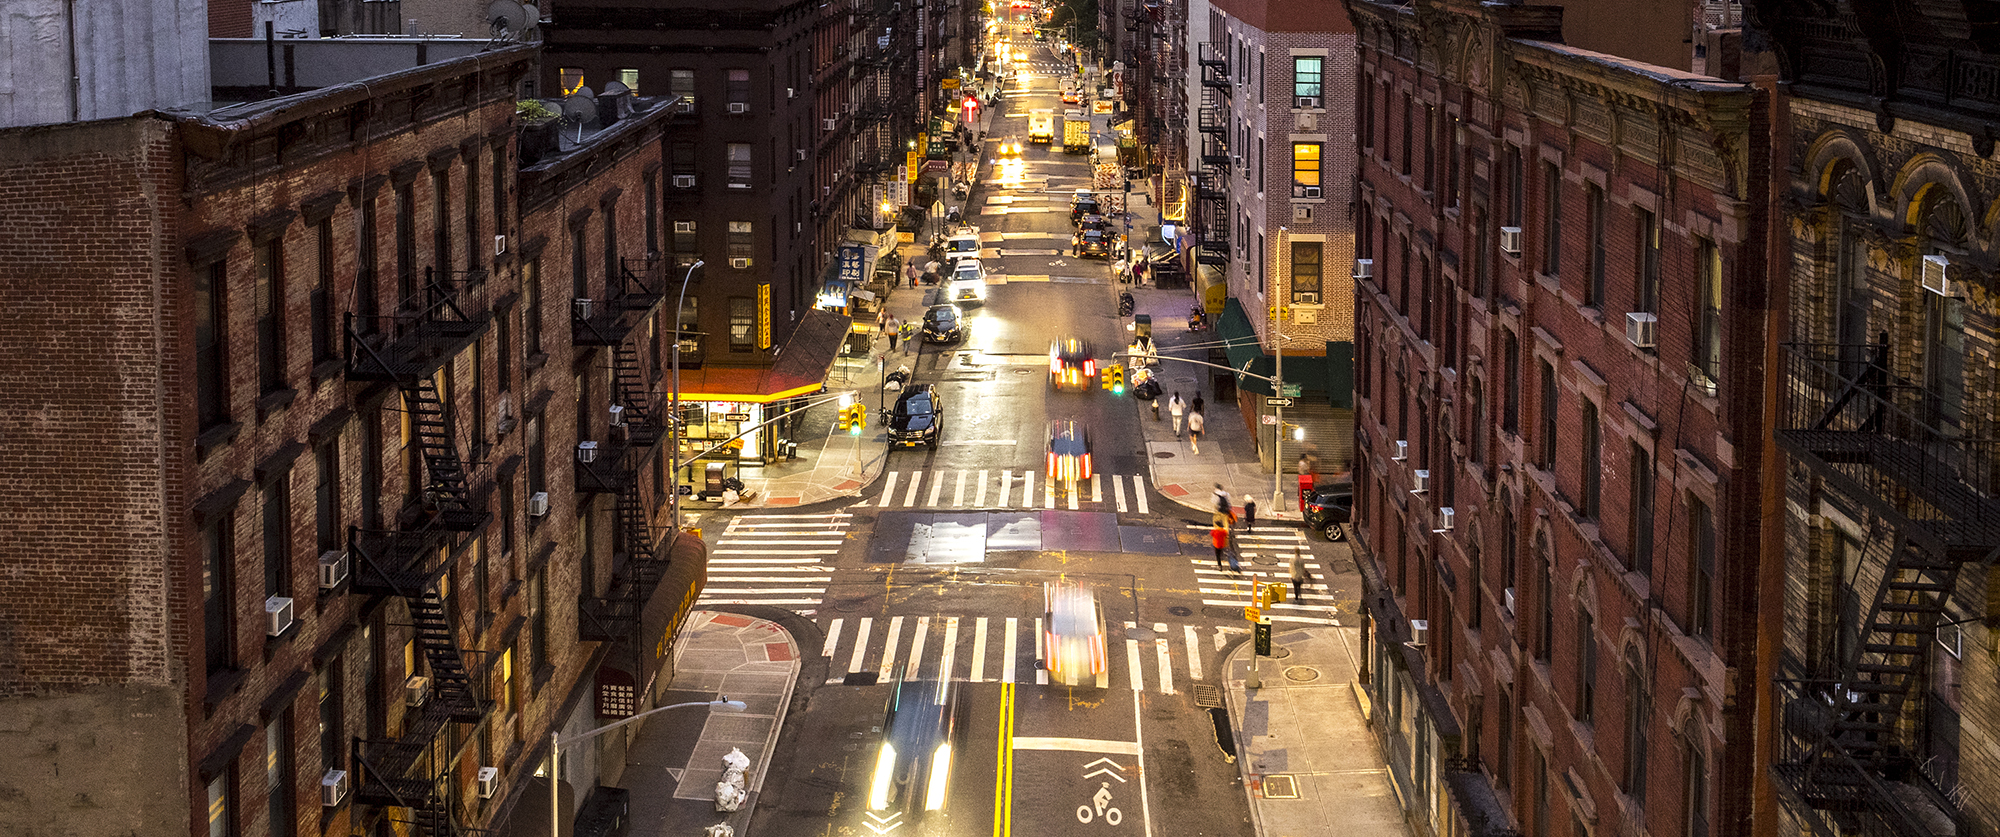 Image of buildings and street at night in Manhattans downtown area